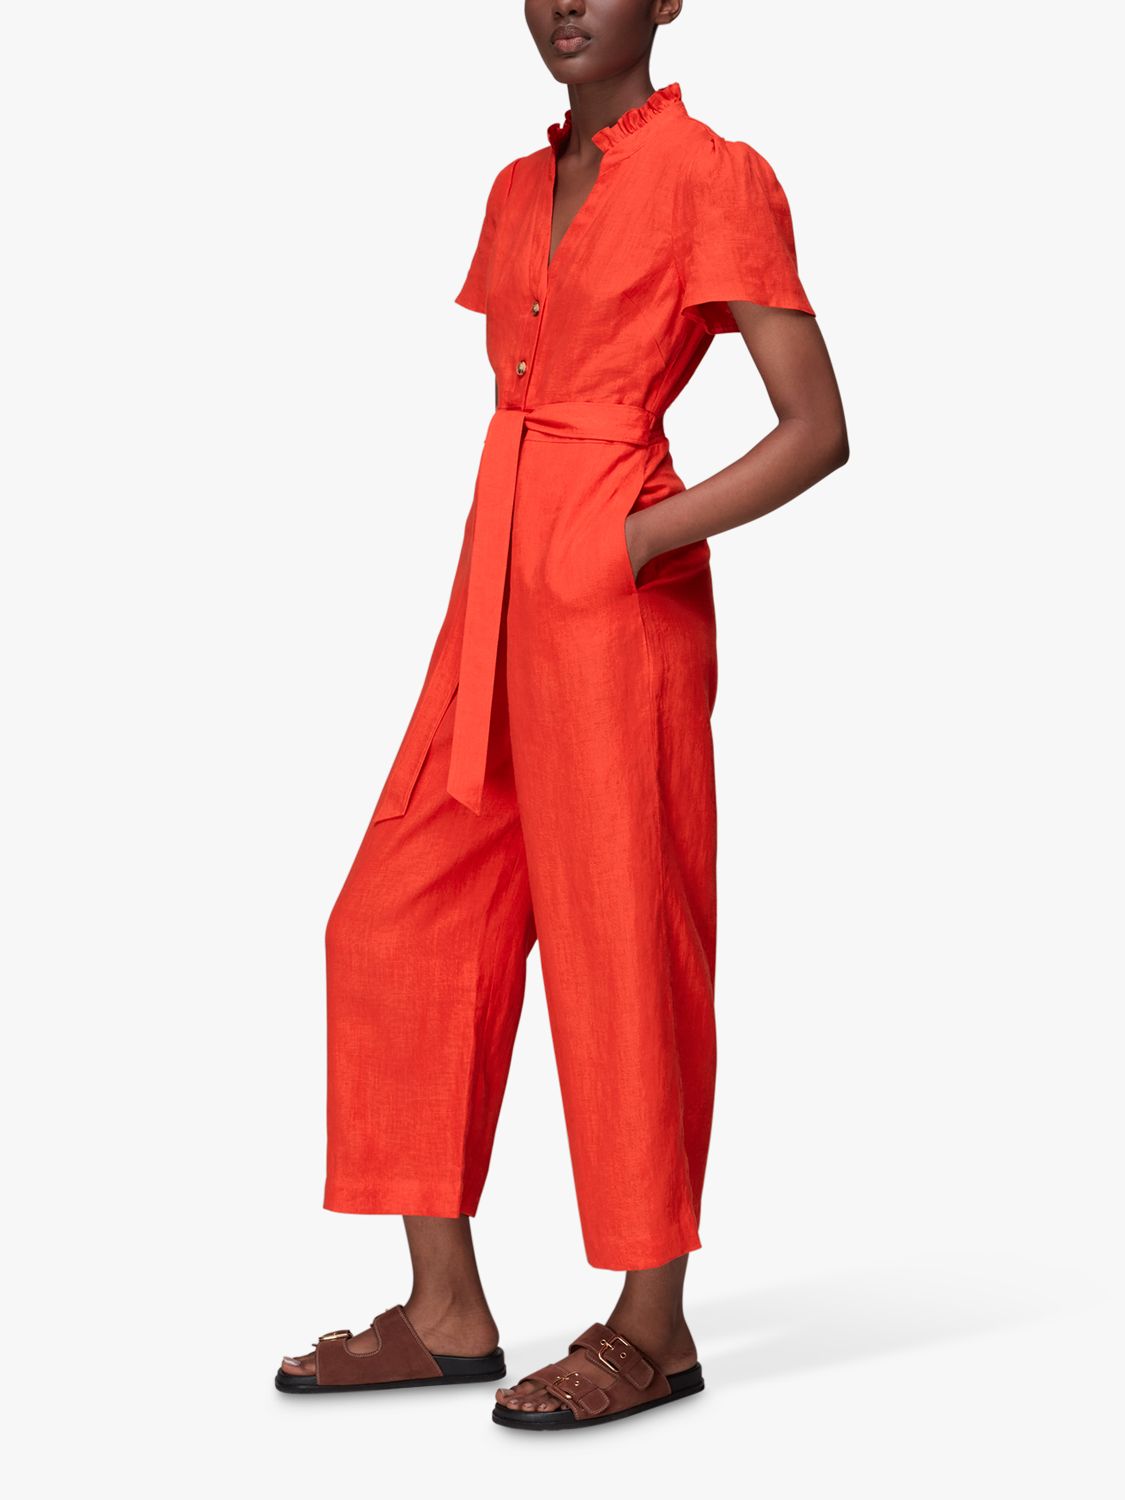 Women's Red Jumpsuits & Playsuits